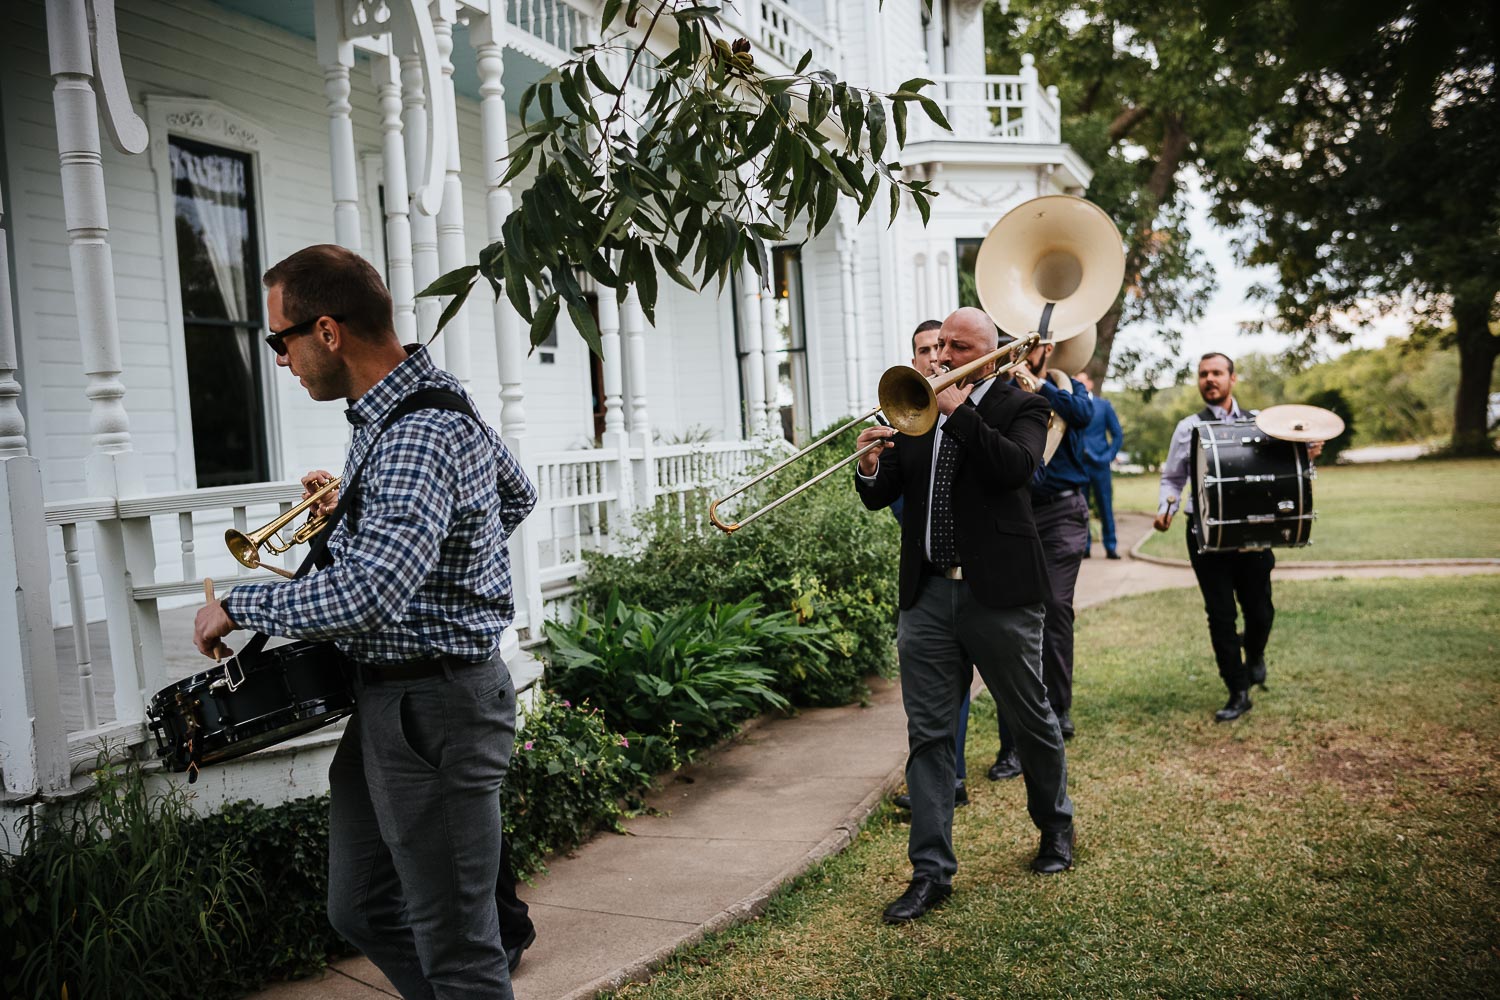 A New Orleans band plays as the wedding ceremony ends at Barr Mansion, Texas